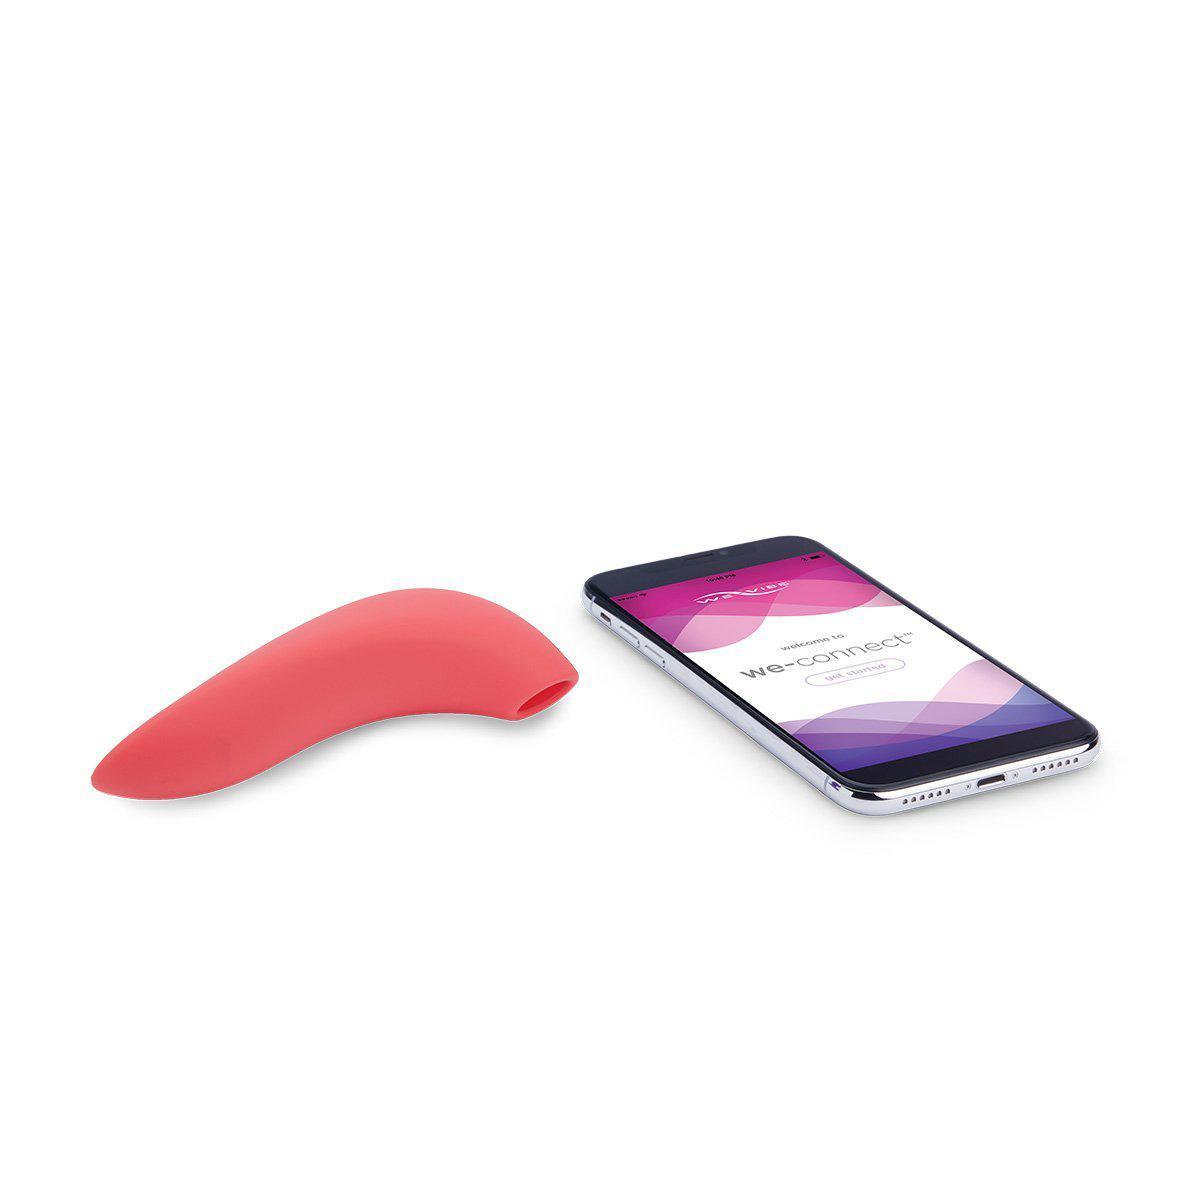 The We-Vibe Melt sitting out next to a cell phone. The cell phone is turned on and displaying the home screen for the We-Connect app to pair with the Melt. The Melt is surprisingly small and even shorter and thinner than a cell phone. | Kinkly Shop